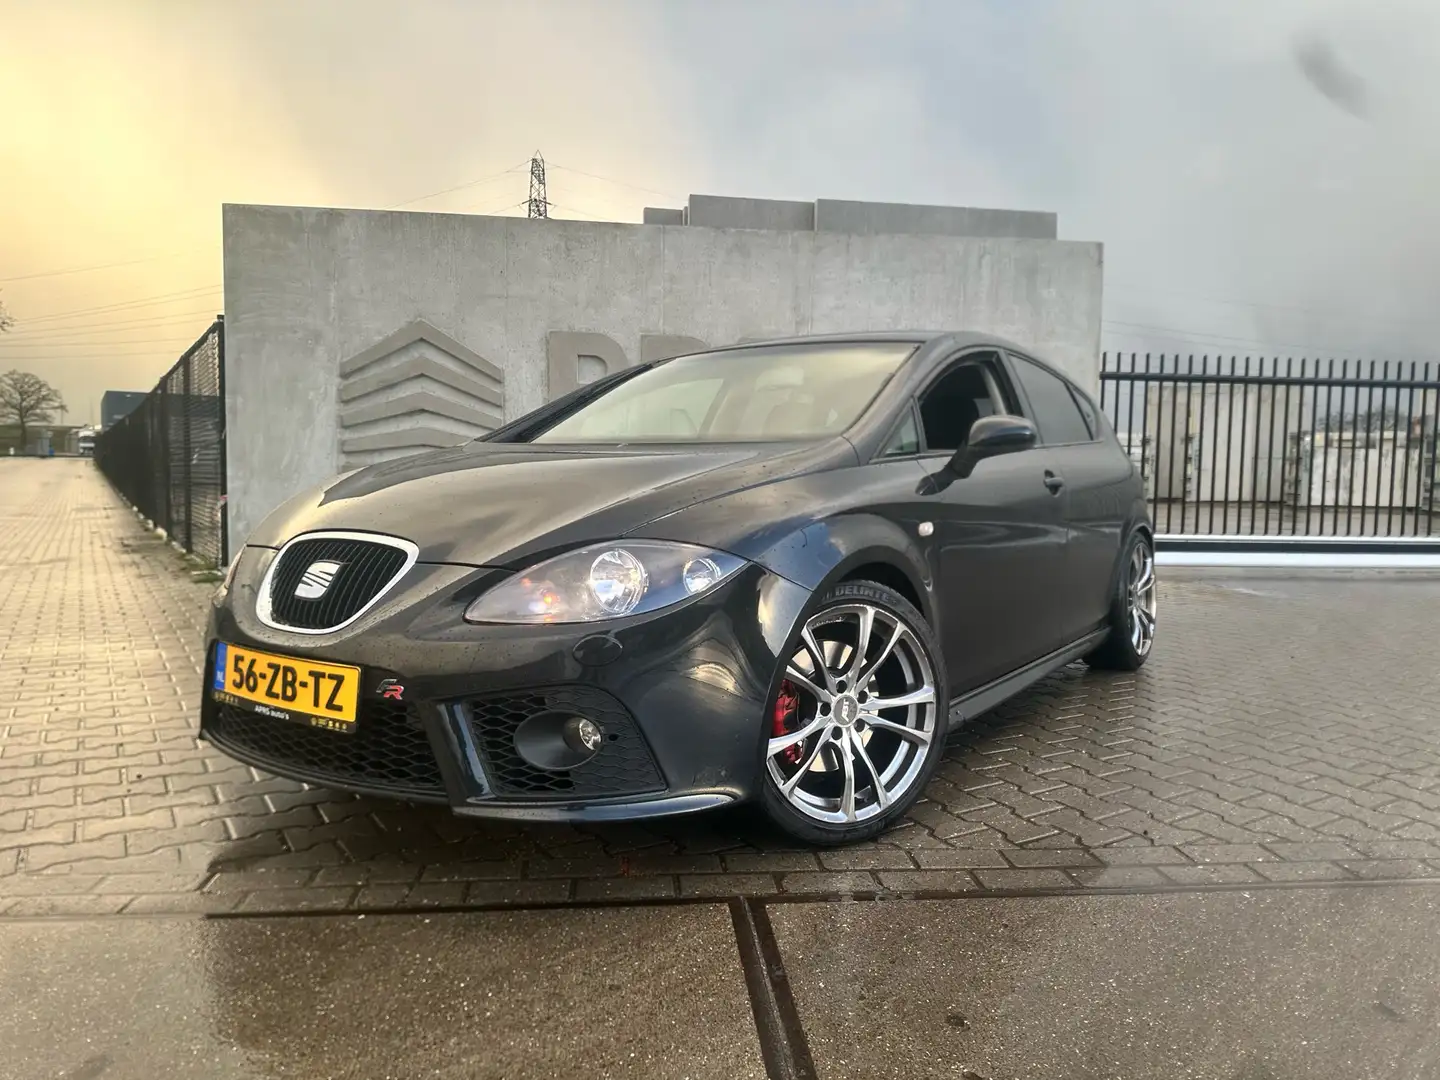 SEAT Leon 2.0 TFSI FR stage1, pops &bangs, ABT, H&R, Kanon crna - 1